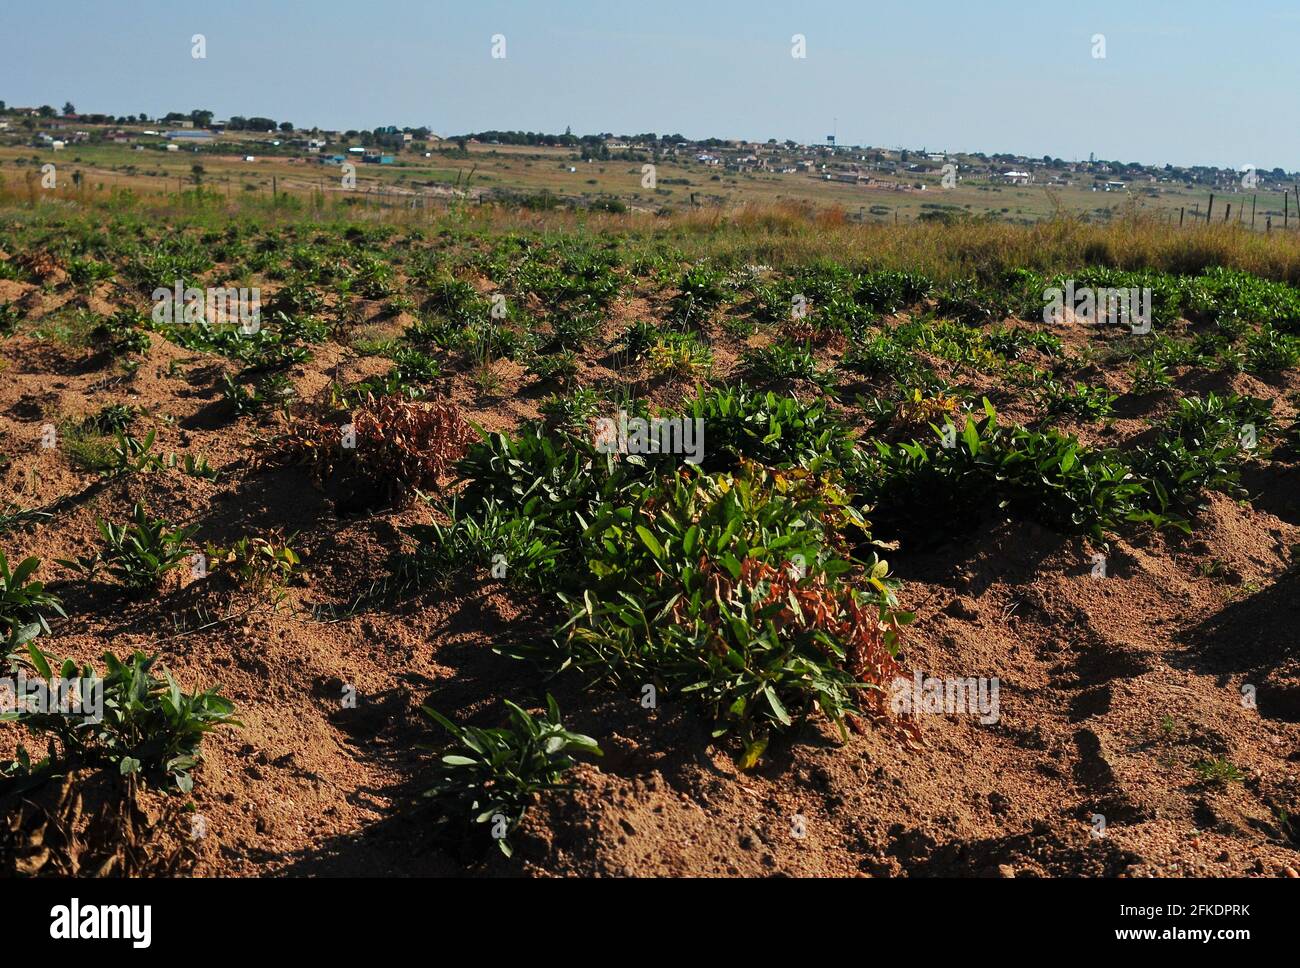 Subsistence farmers in rural South Africa harvesting bambara groundnuts after covid-19 lockdown Stock Photo